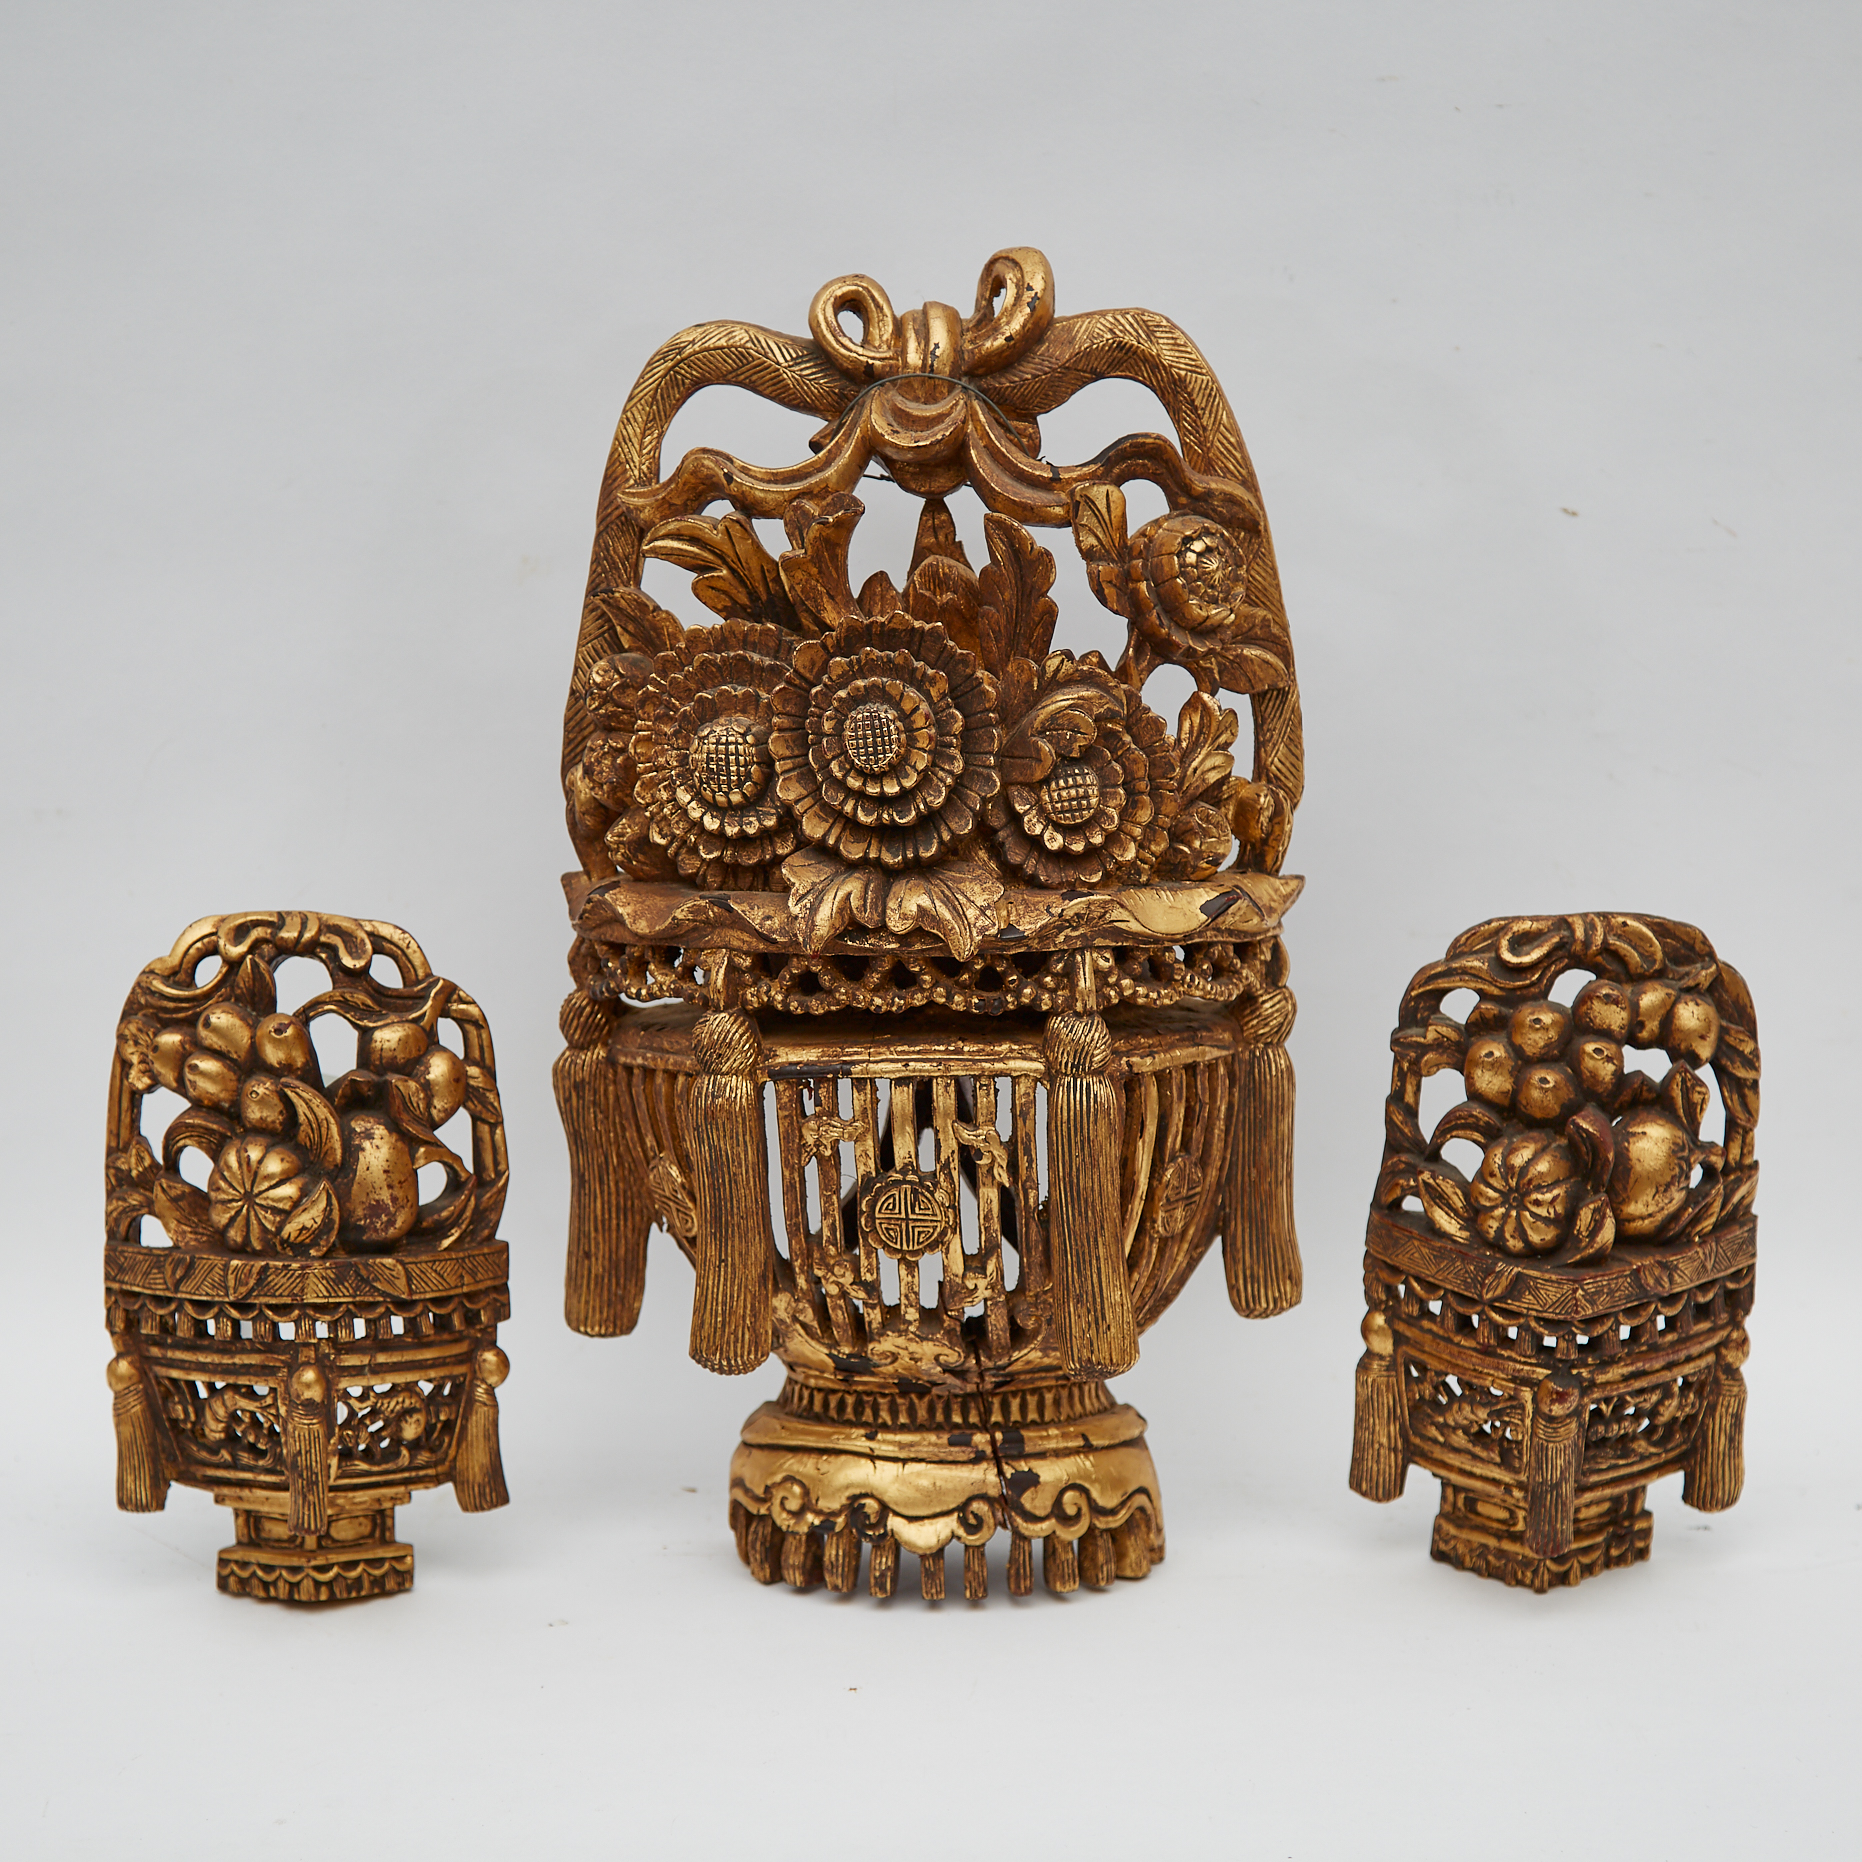 A Set of Three Gilt Wood Floral Basket Carvings, Early 20th Century